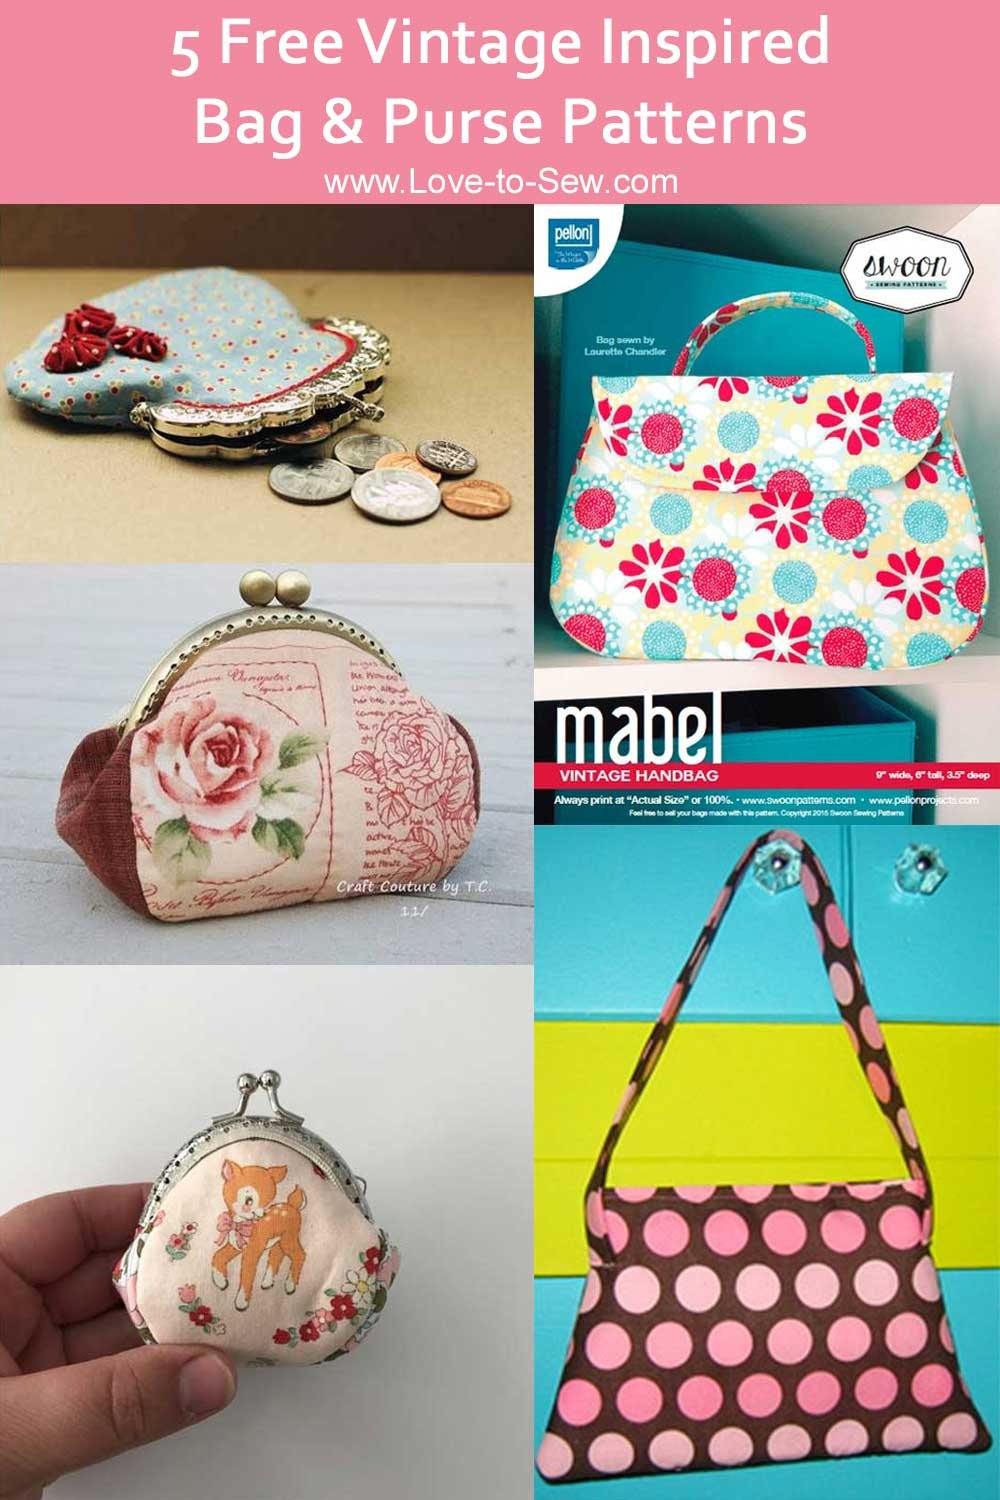 5 Free Vintage Style Purse & Bag Patterns to Sew - Love to Stitch and Sew